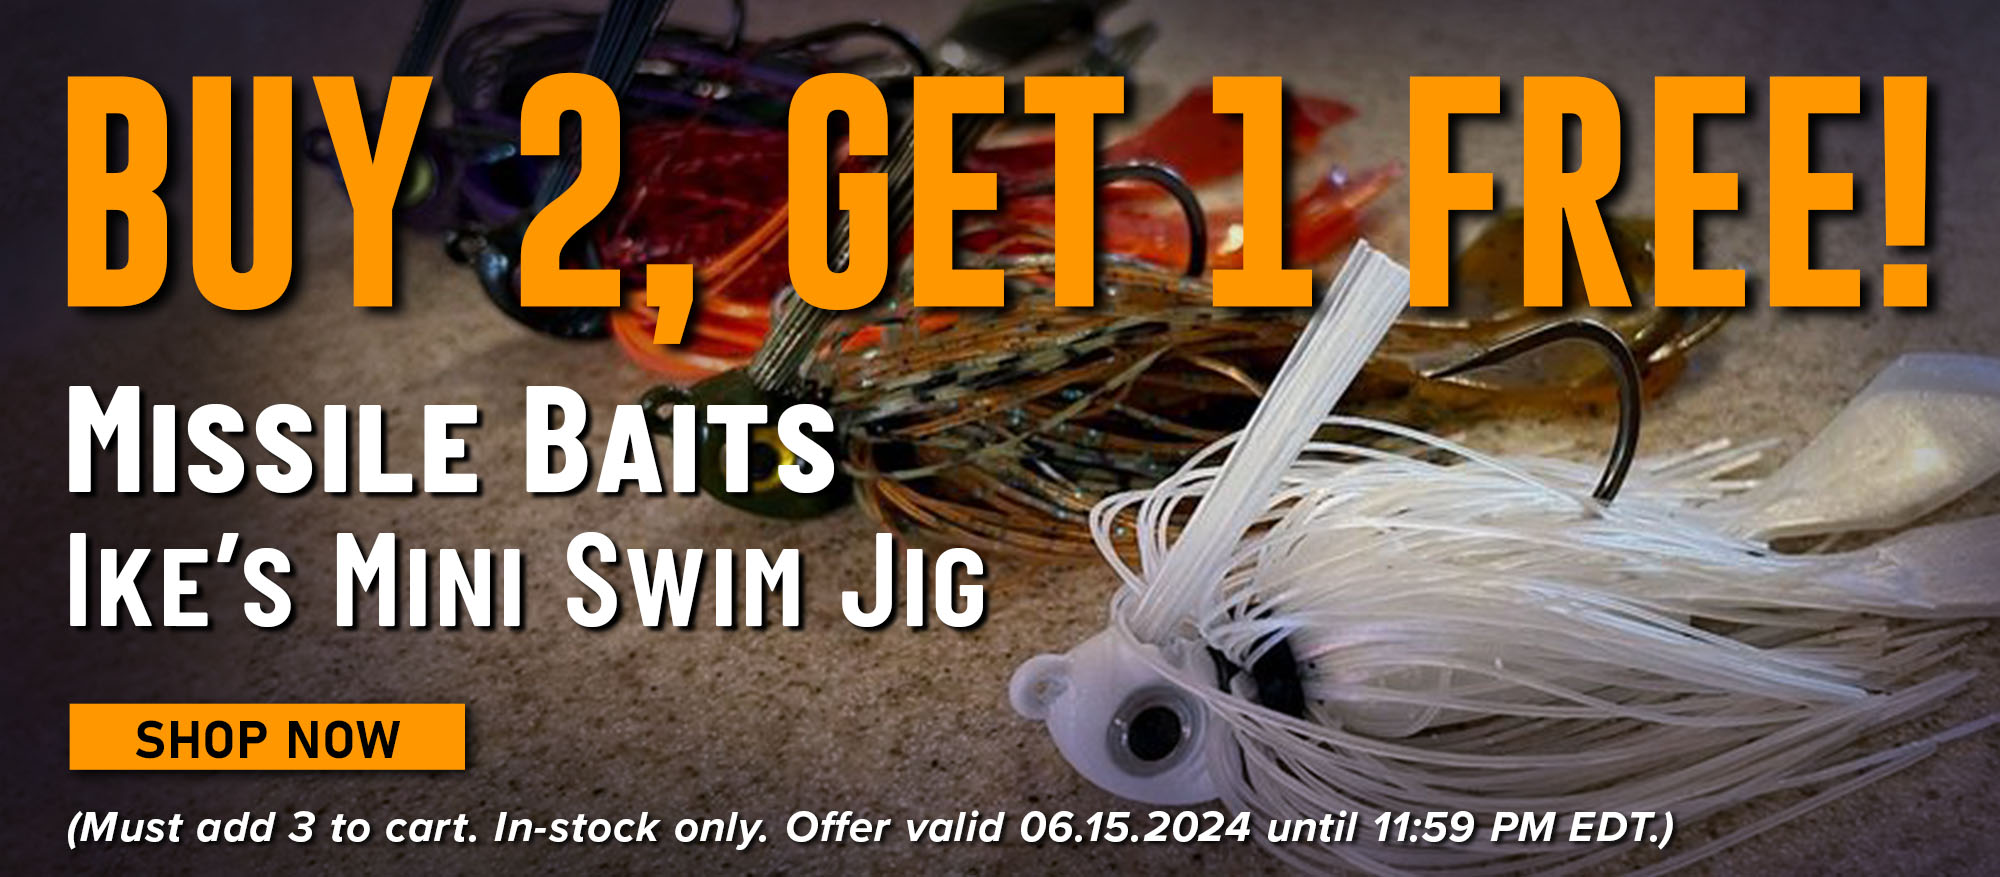 Buy 2, Get 1 Free! Missile Baits Ike's Mini Swim Jig Shop Now (Must add 3 to cart. In-stock only. Offer valid 06.15.2024 until 11:59 PM EDT.)